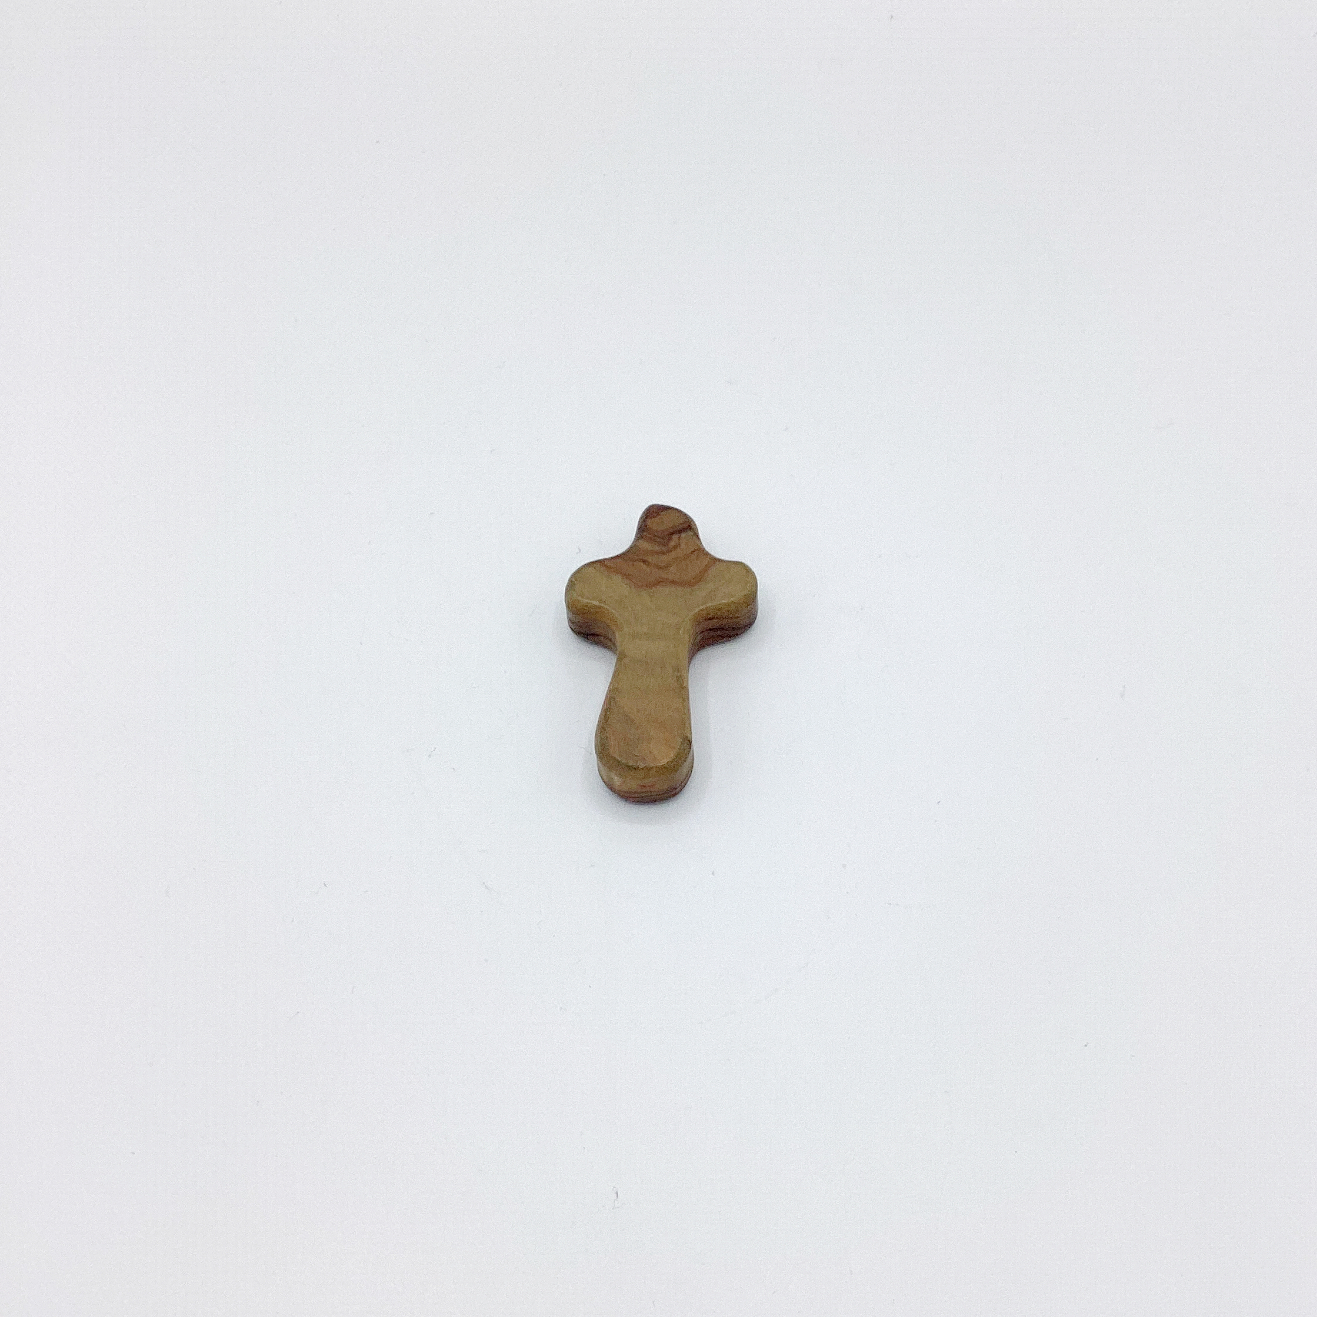 Photo of a small wooden cross.